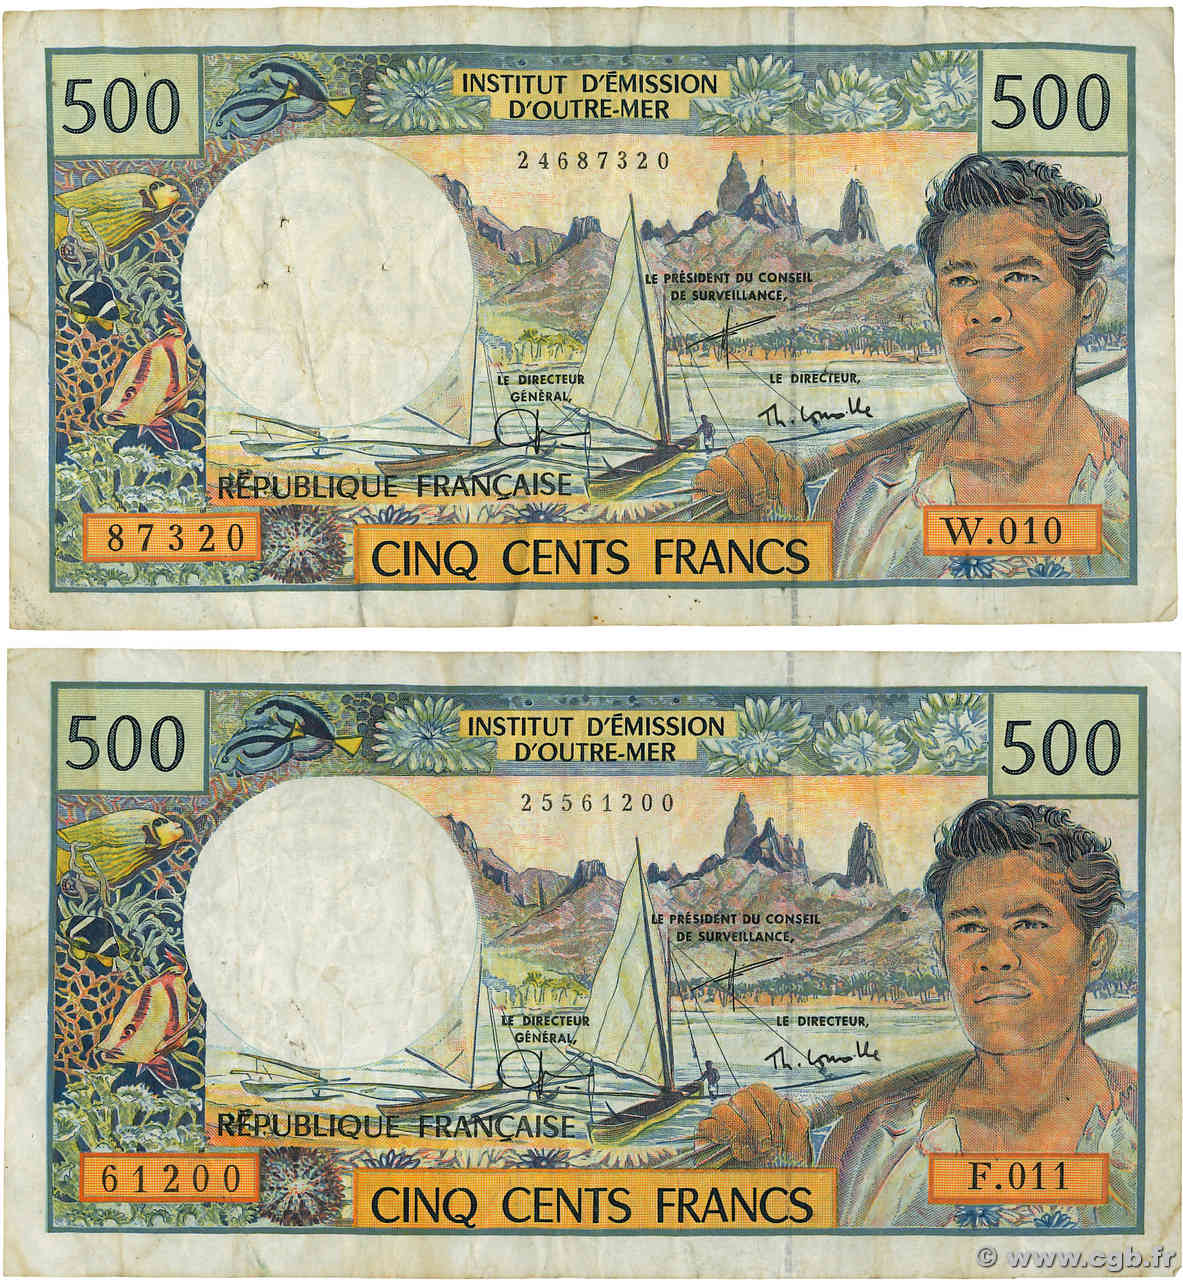 500 Francs Lot FRENCH PACIFIC TERRITORIES  1992 P.01e MB